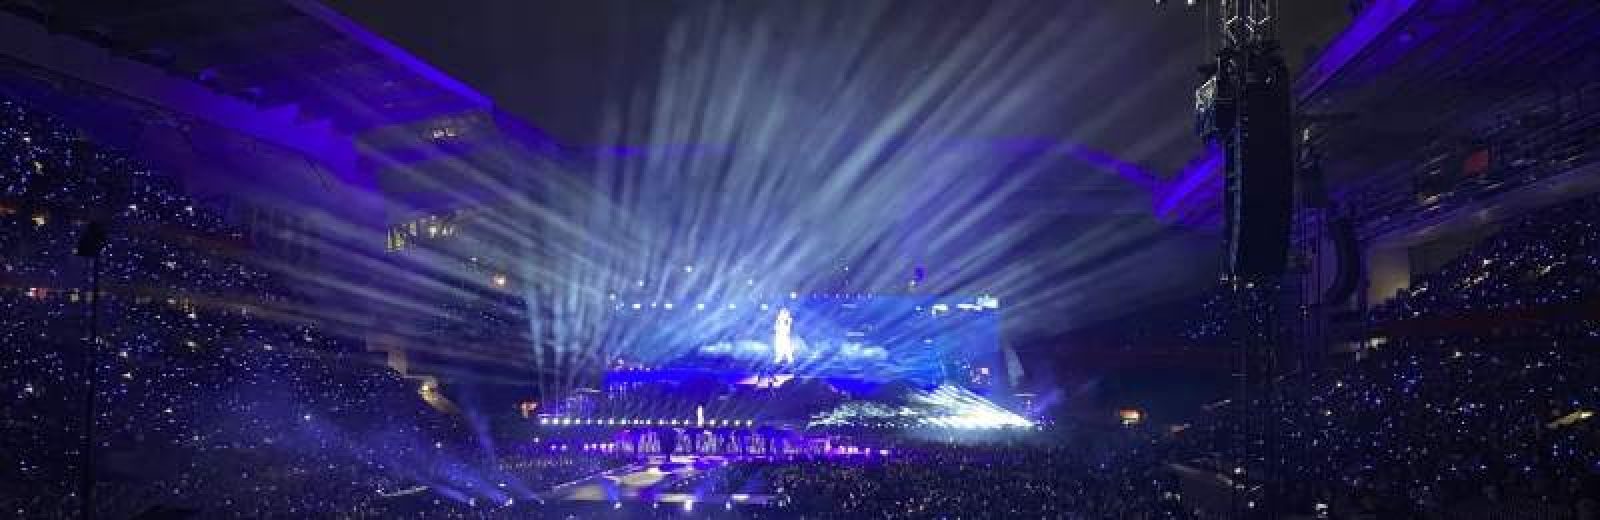 Live music performance in large venue with audience, laser lights and performer on stage